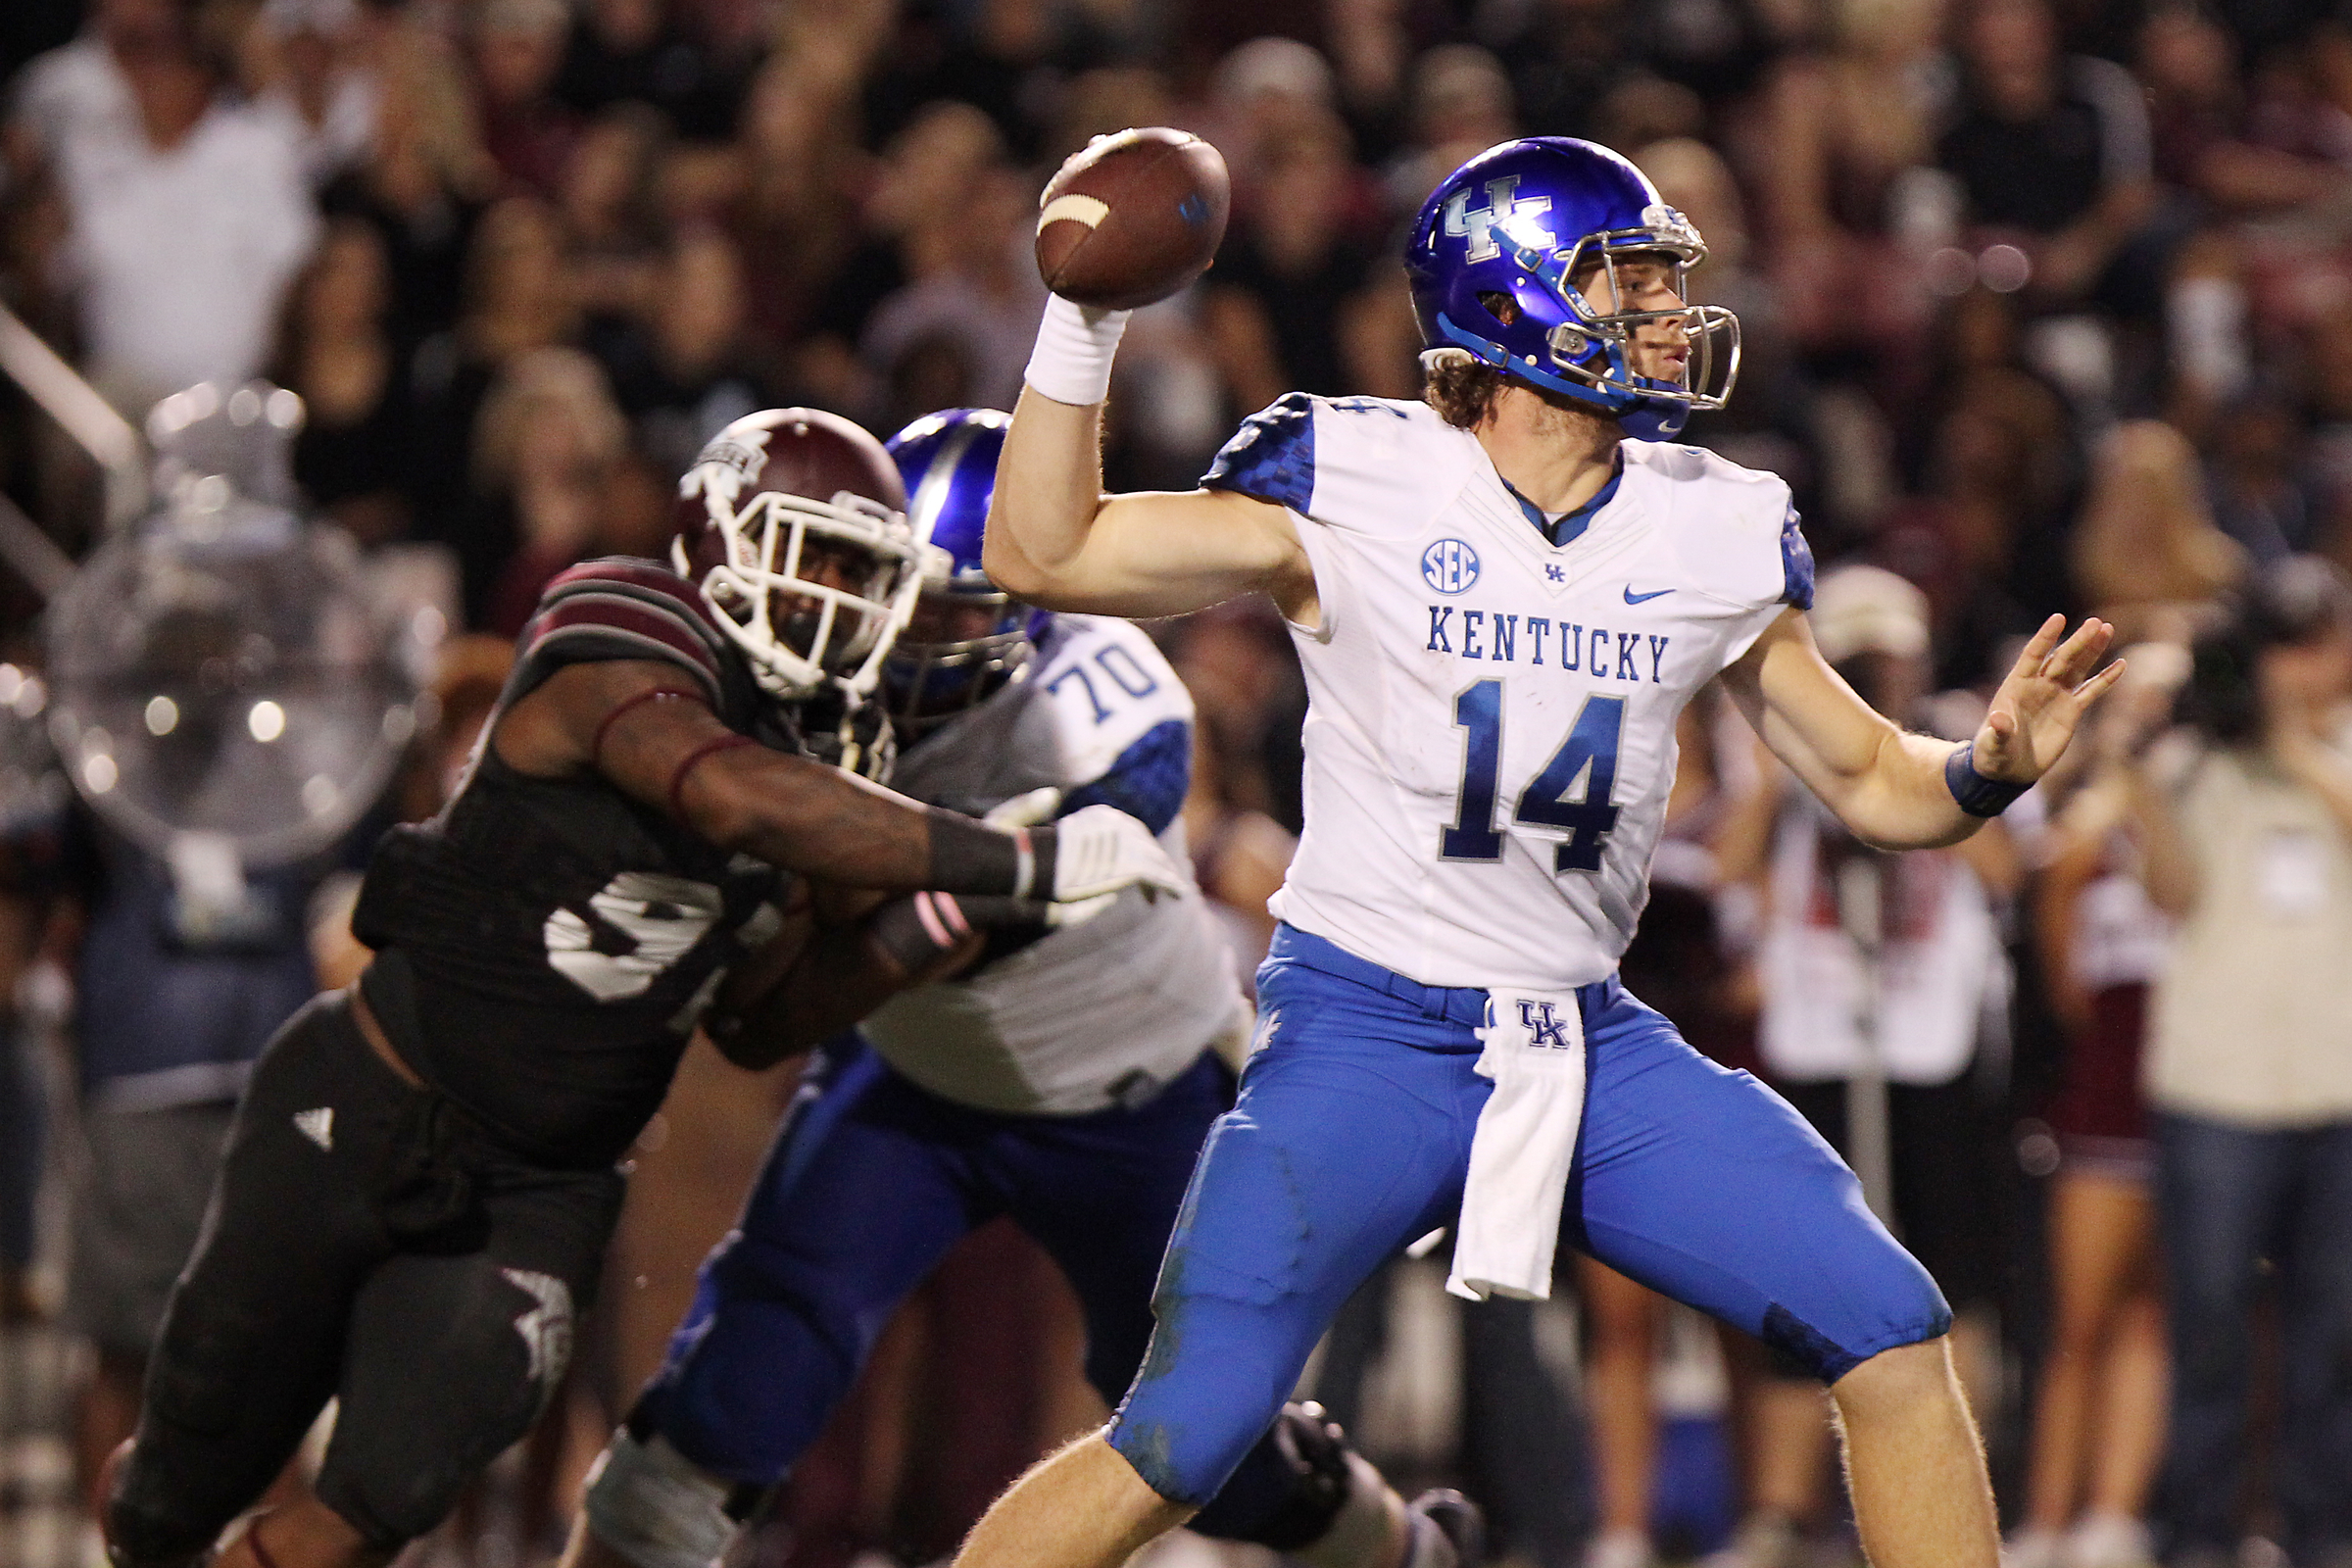 Kentucky-Mississippi State Photo Gallery